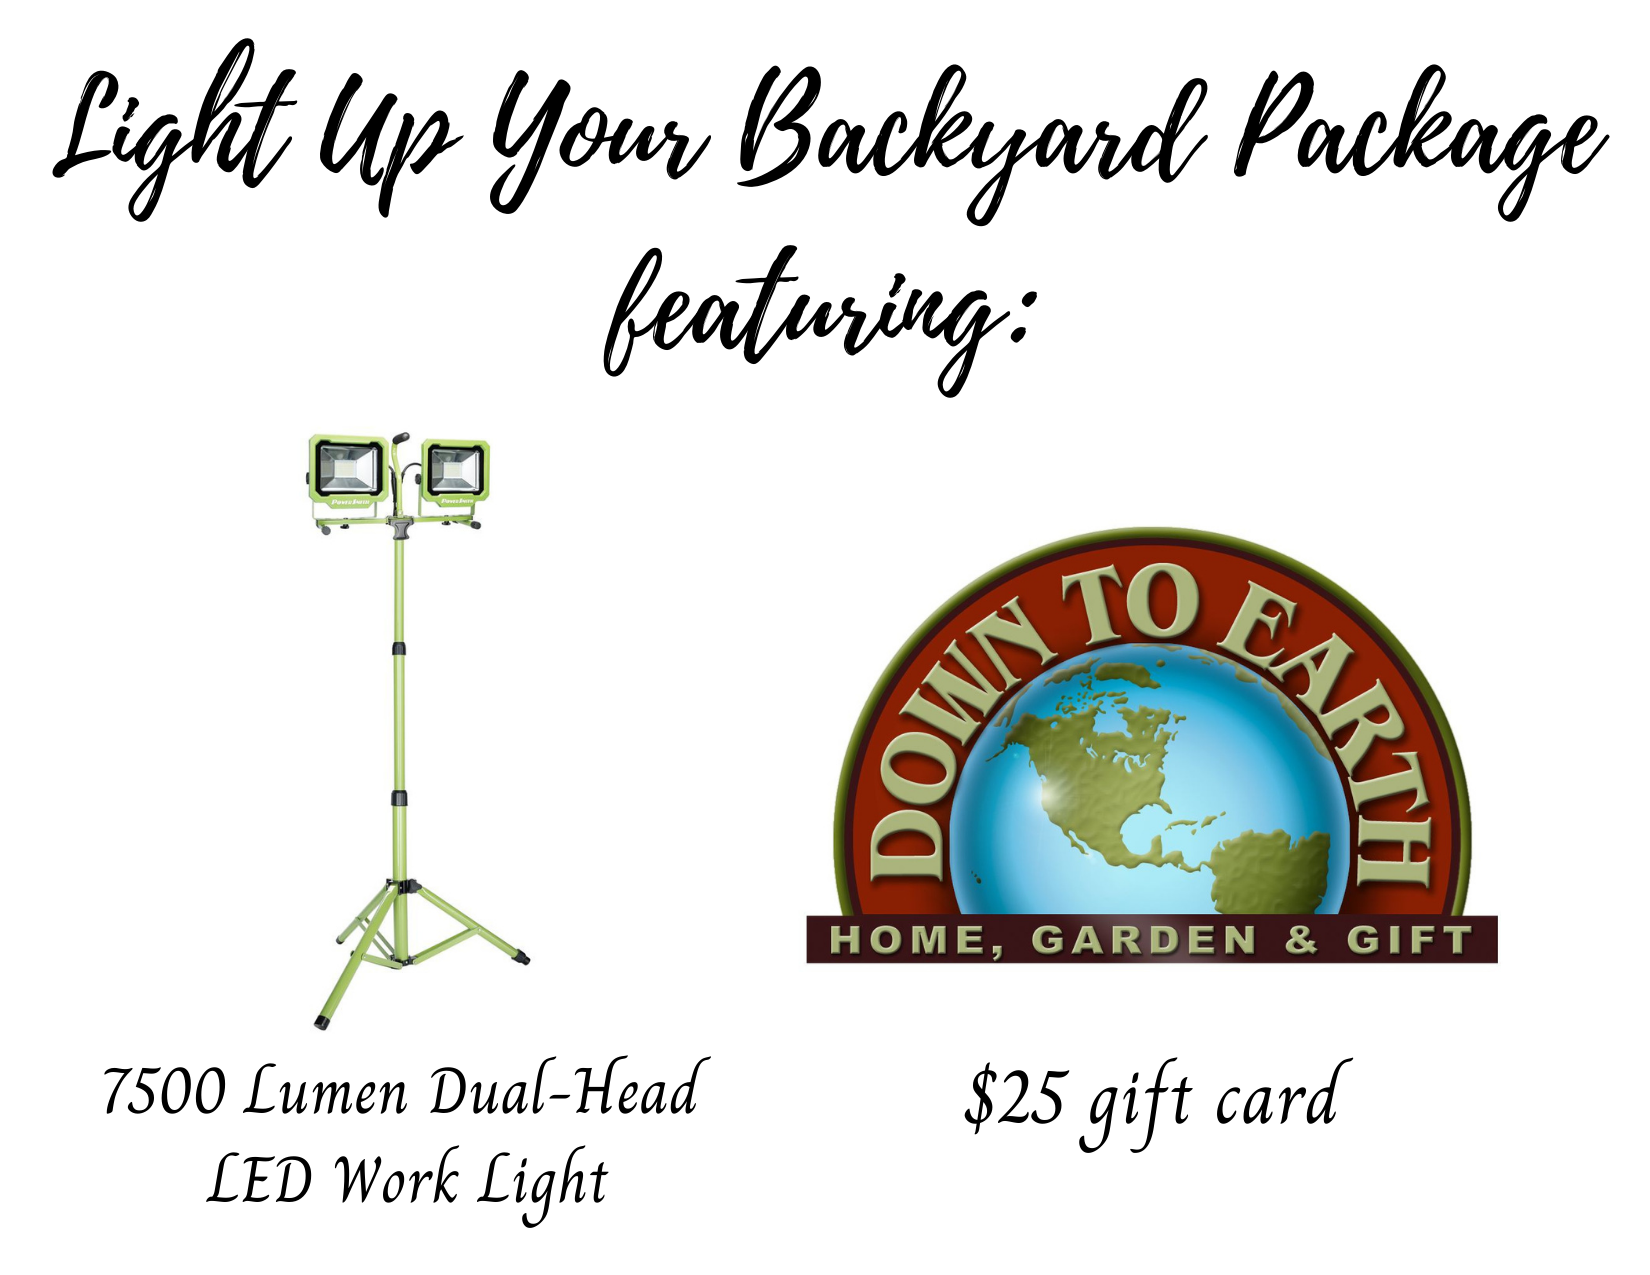 Light Up Your Backyard Package